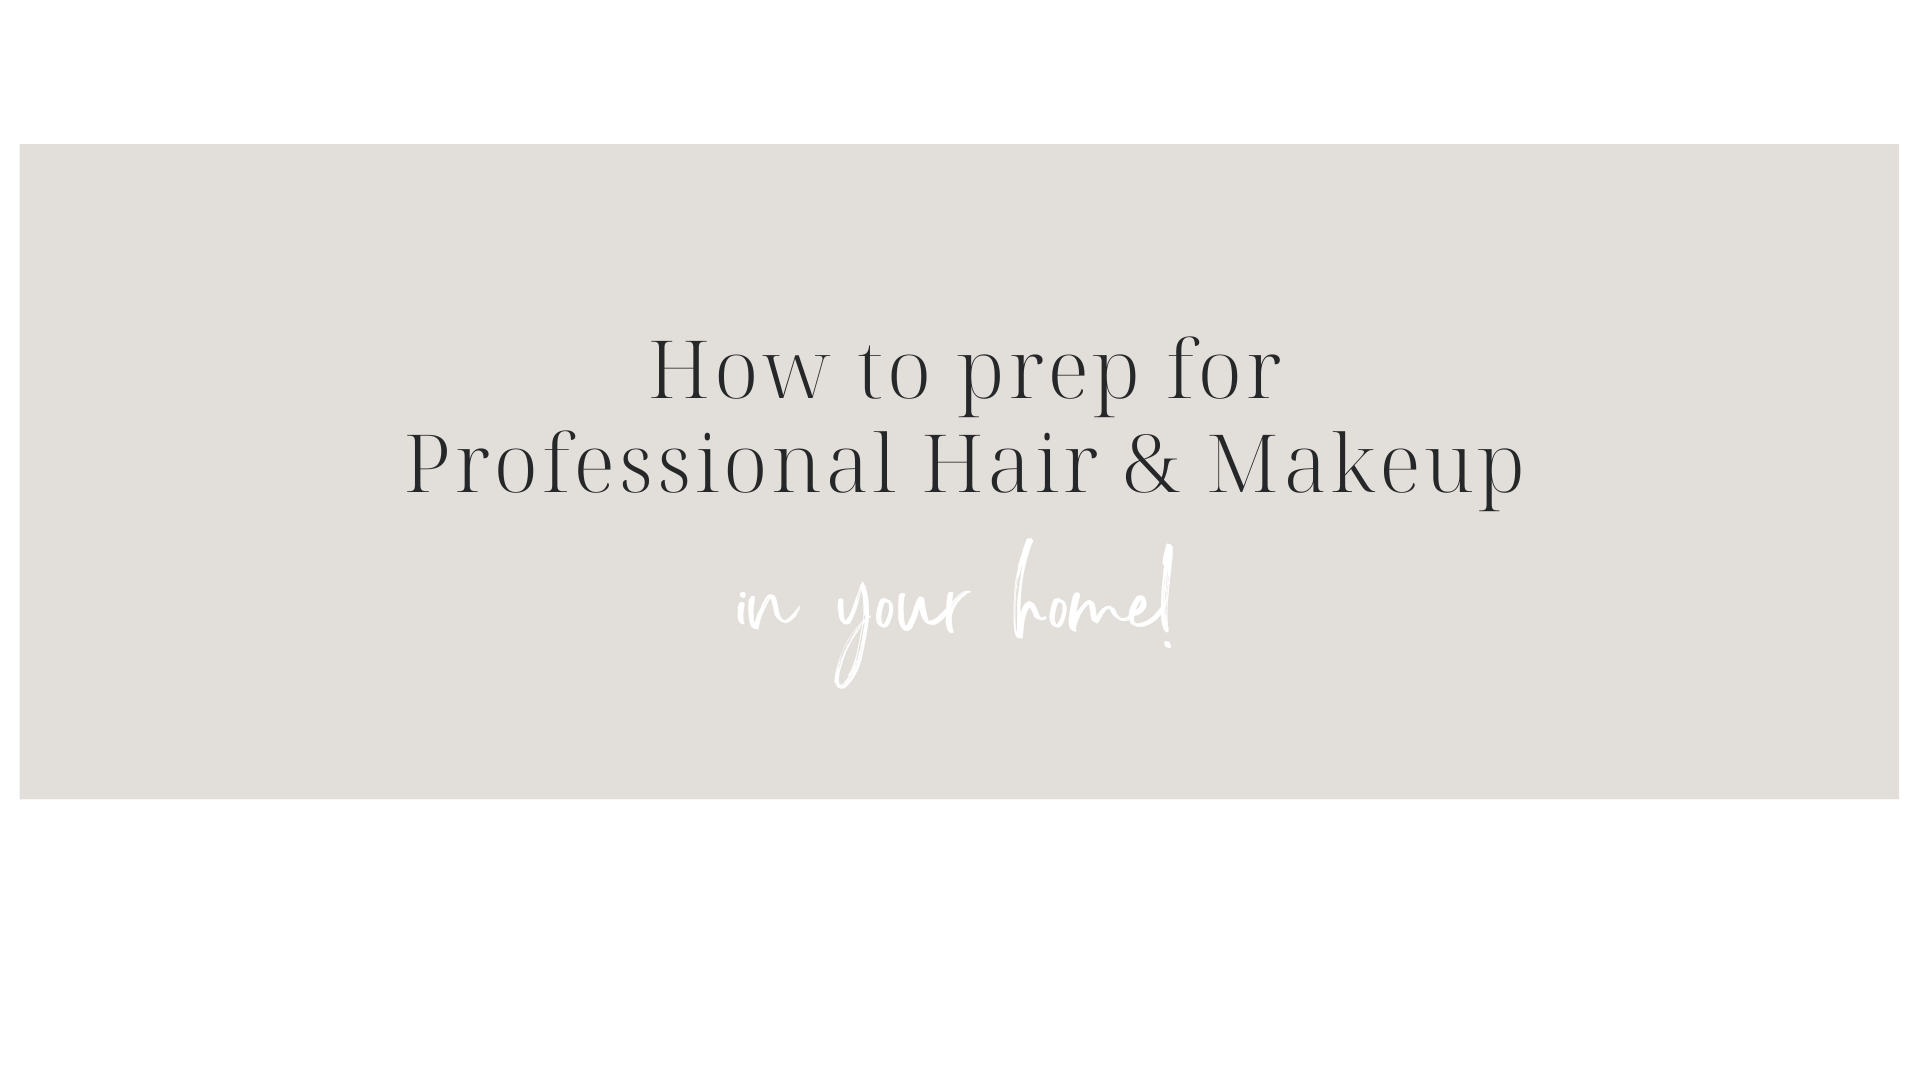 How to prep for having Professional hair and makeup come into your home